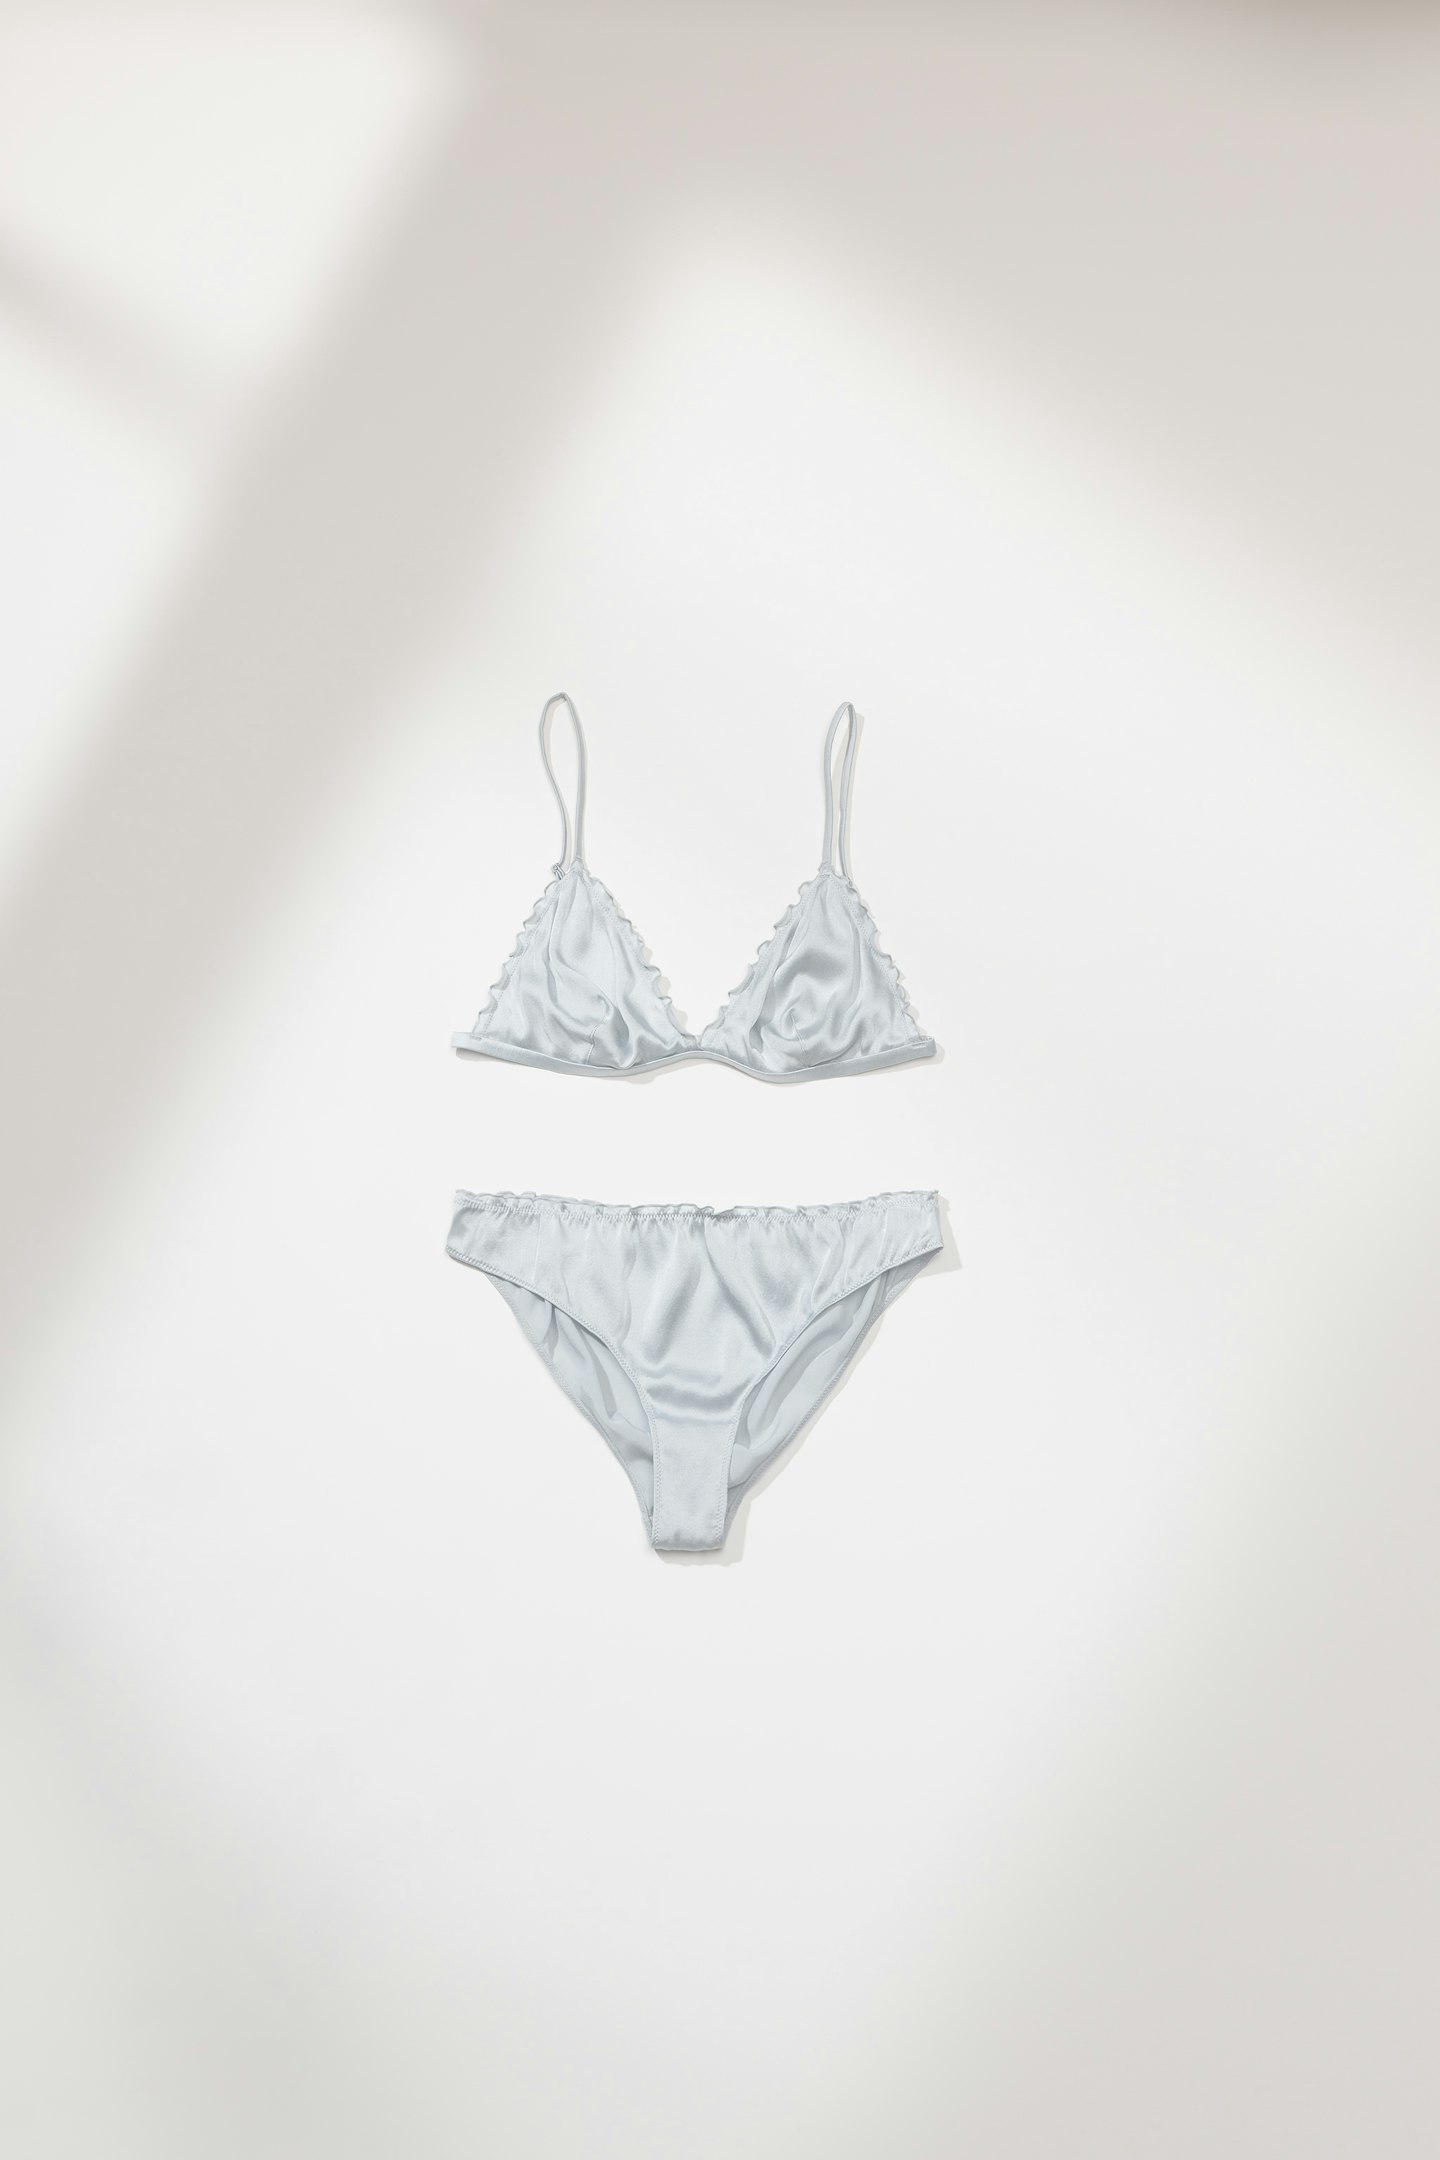 Zara's First Ever Lingerie Collection Is Here And Includes Sleepwear